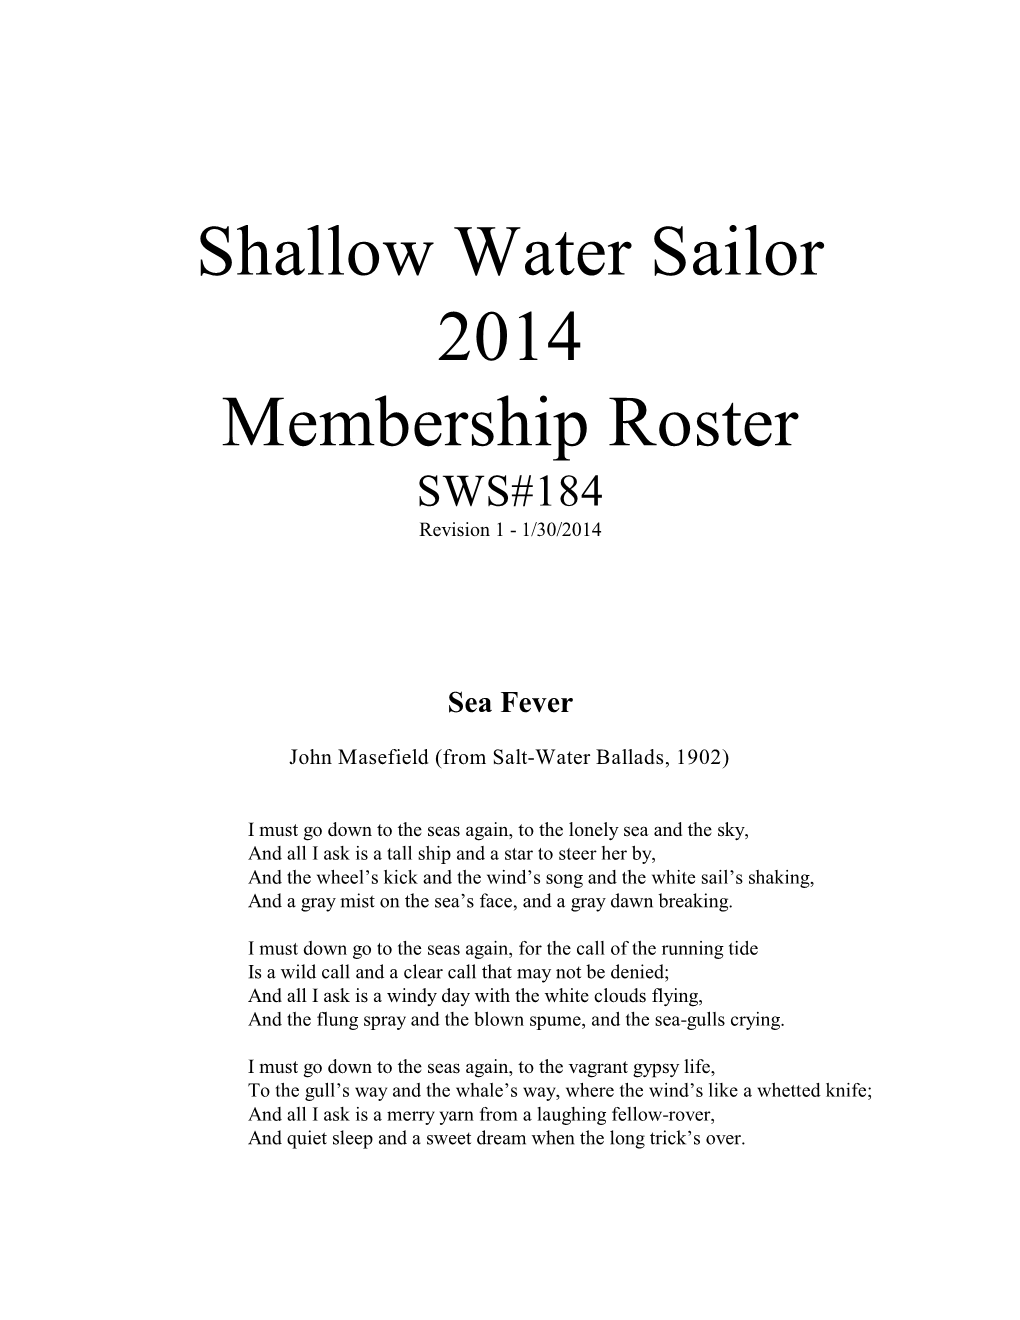 Shallow Water Sailor 2014 Membership Roster SWS#184 Revision 1 - 1/30/2014